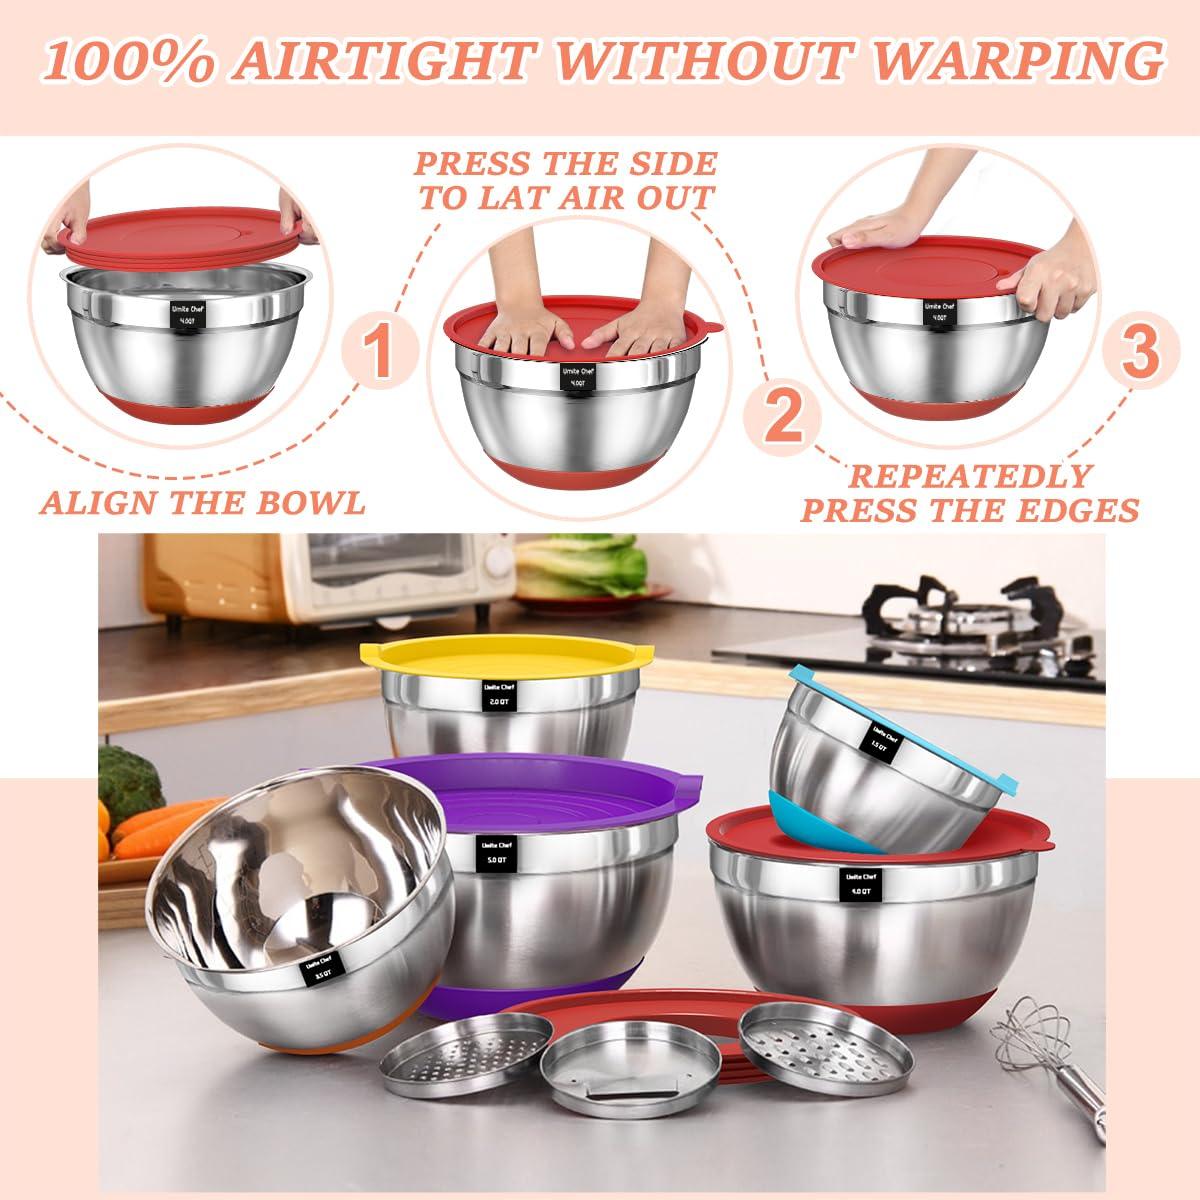 Umite Chef Mixing Bowls with Airtight Lids Set, 8PCS Stainless Steel Nesting Bowls Set, 3 Grater Attachments & Non-Slip Bottoms, Size 5, 4, 3.5, 2, 1.5QT for Baking & Mixing(Colorful) - CookCave